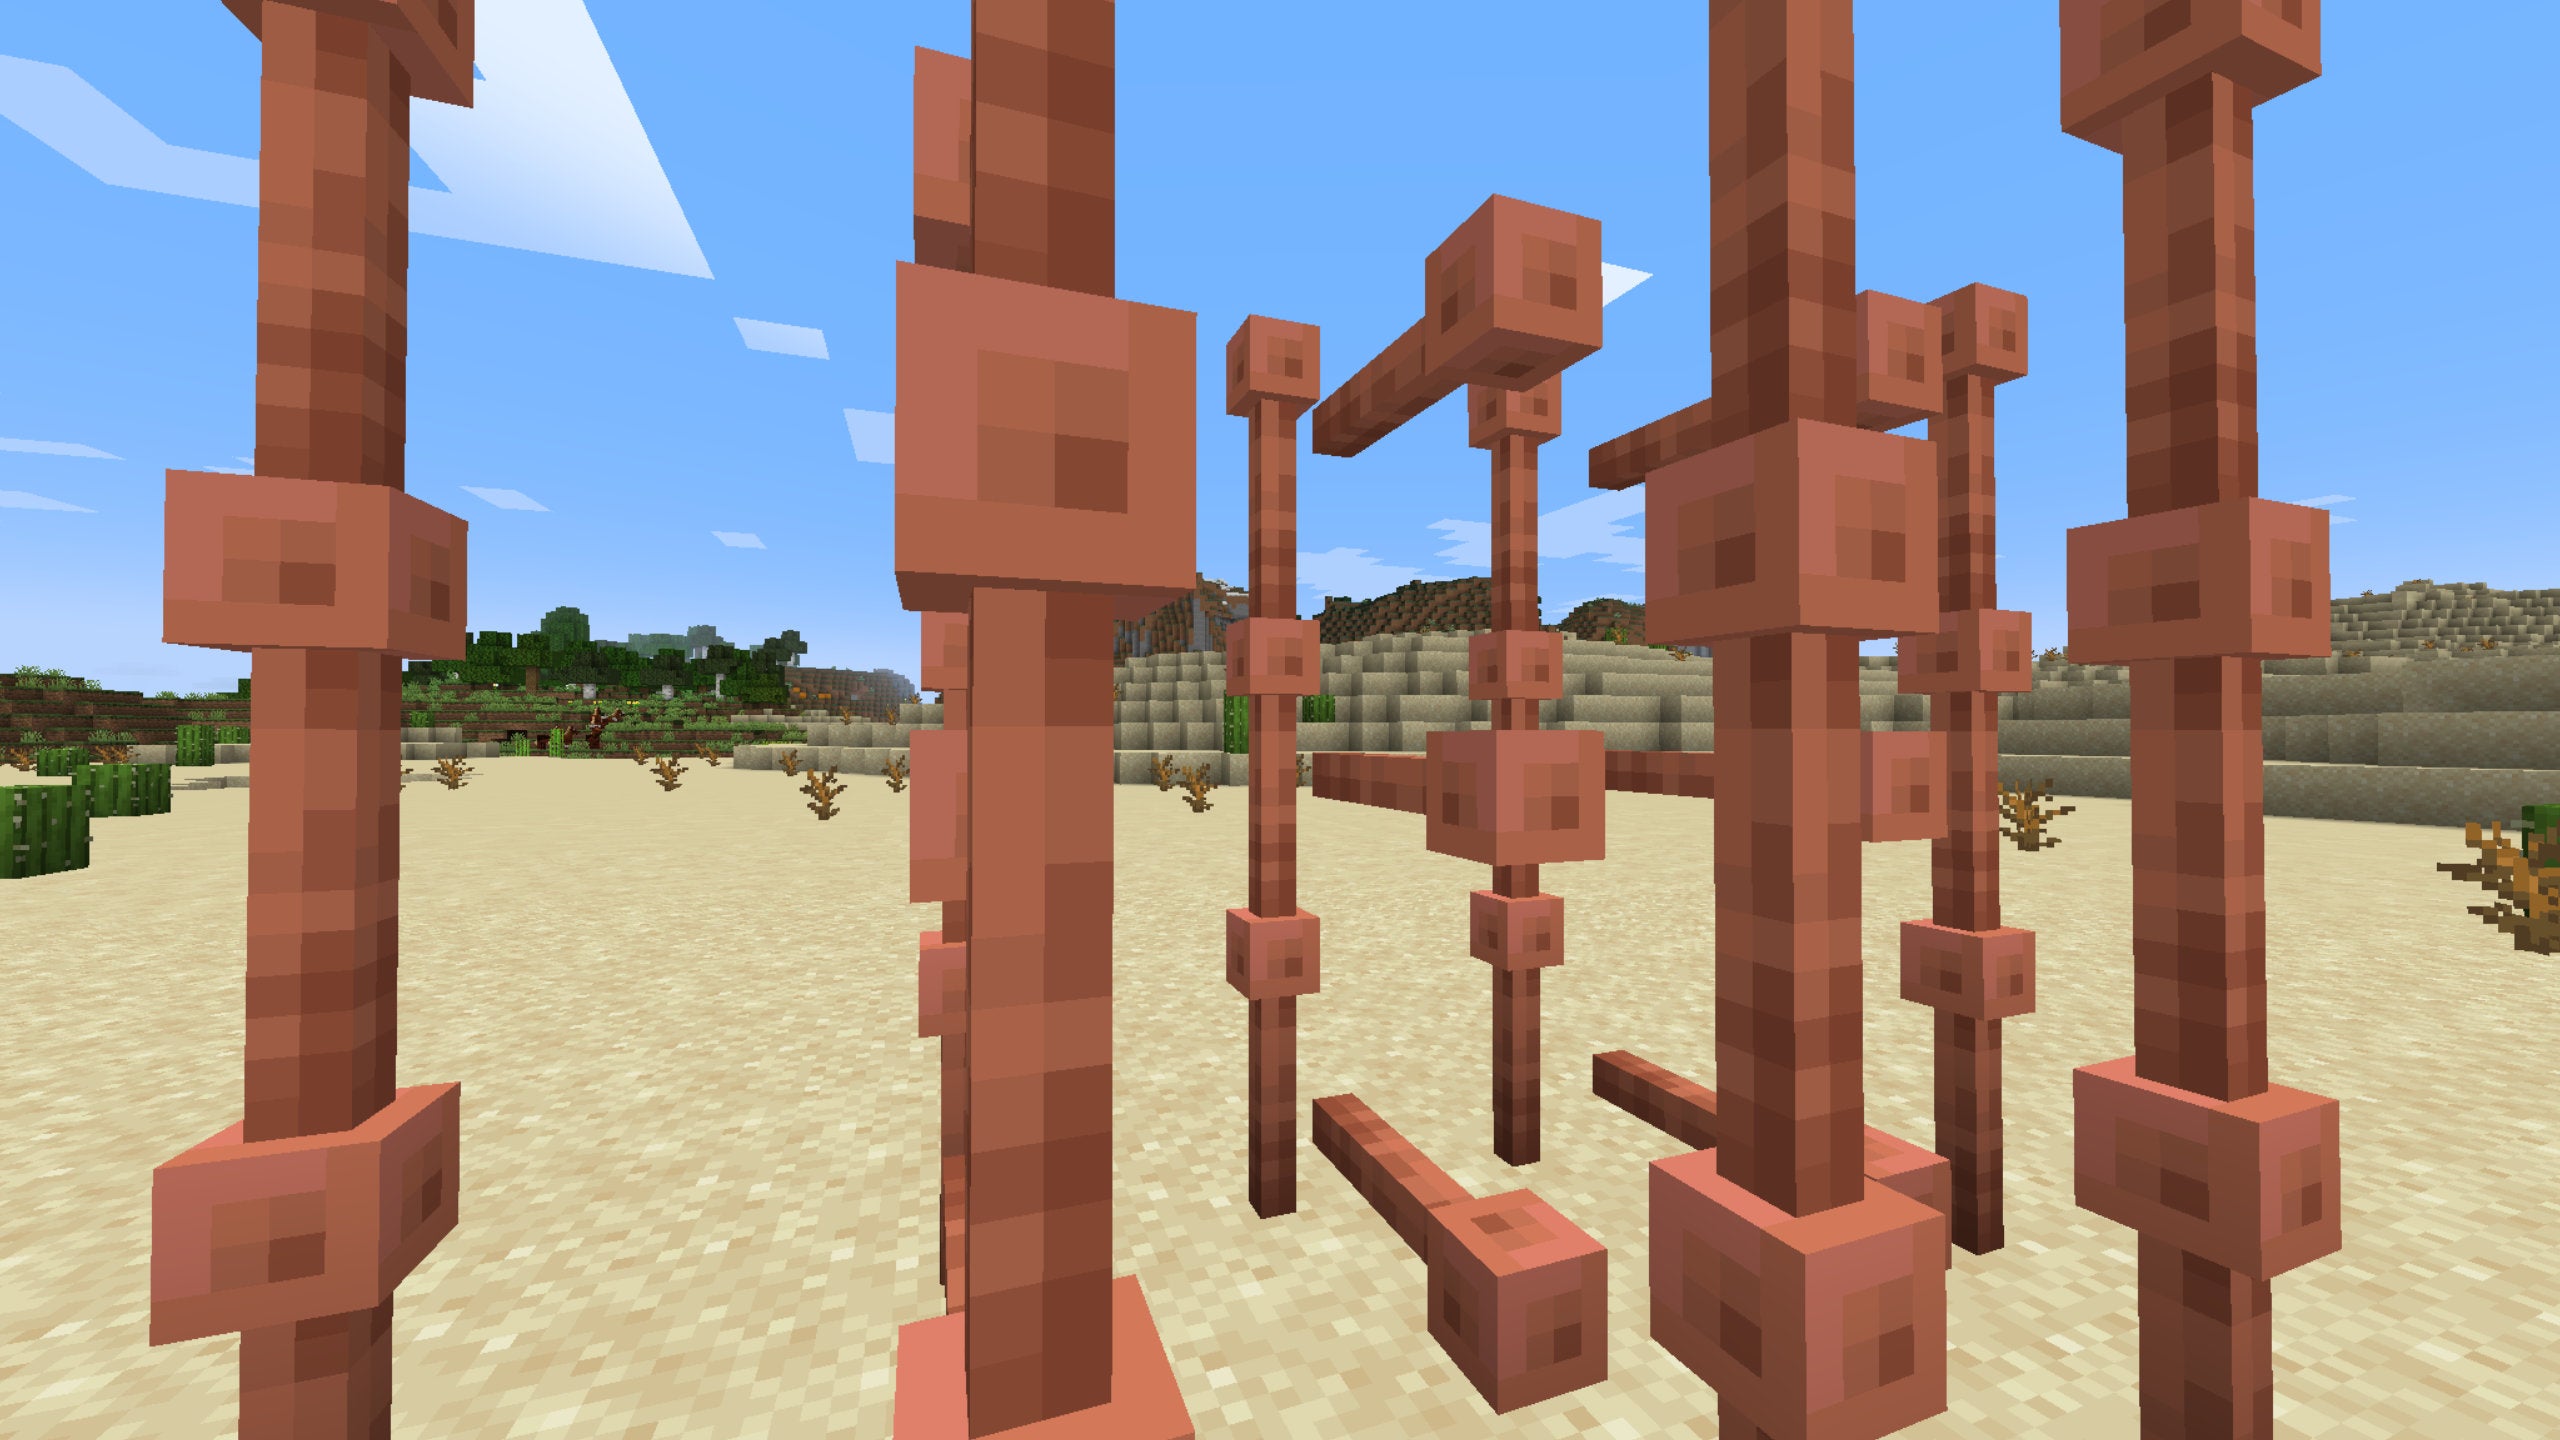 A Minecraft screenshot of several Lightning Rods organised in a shamefully impractical manner in the middle of a desert.